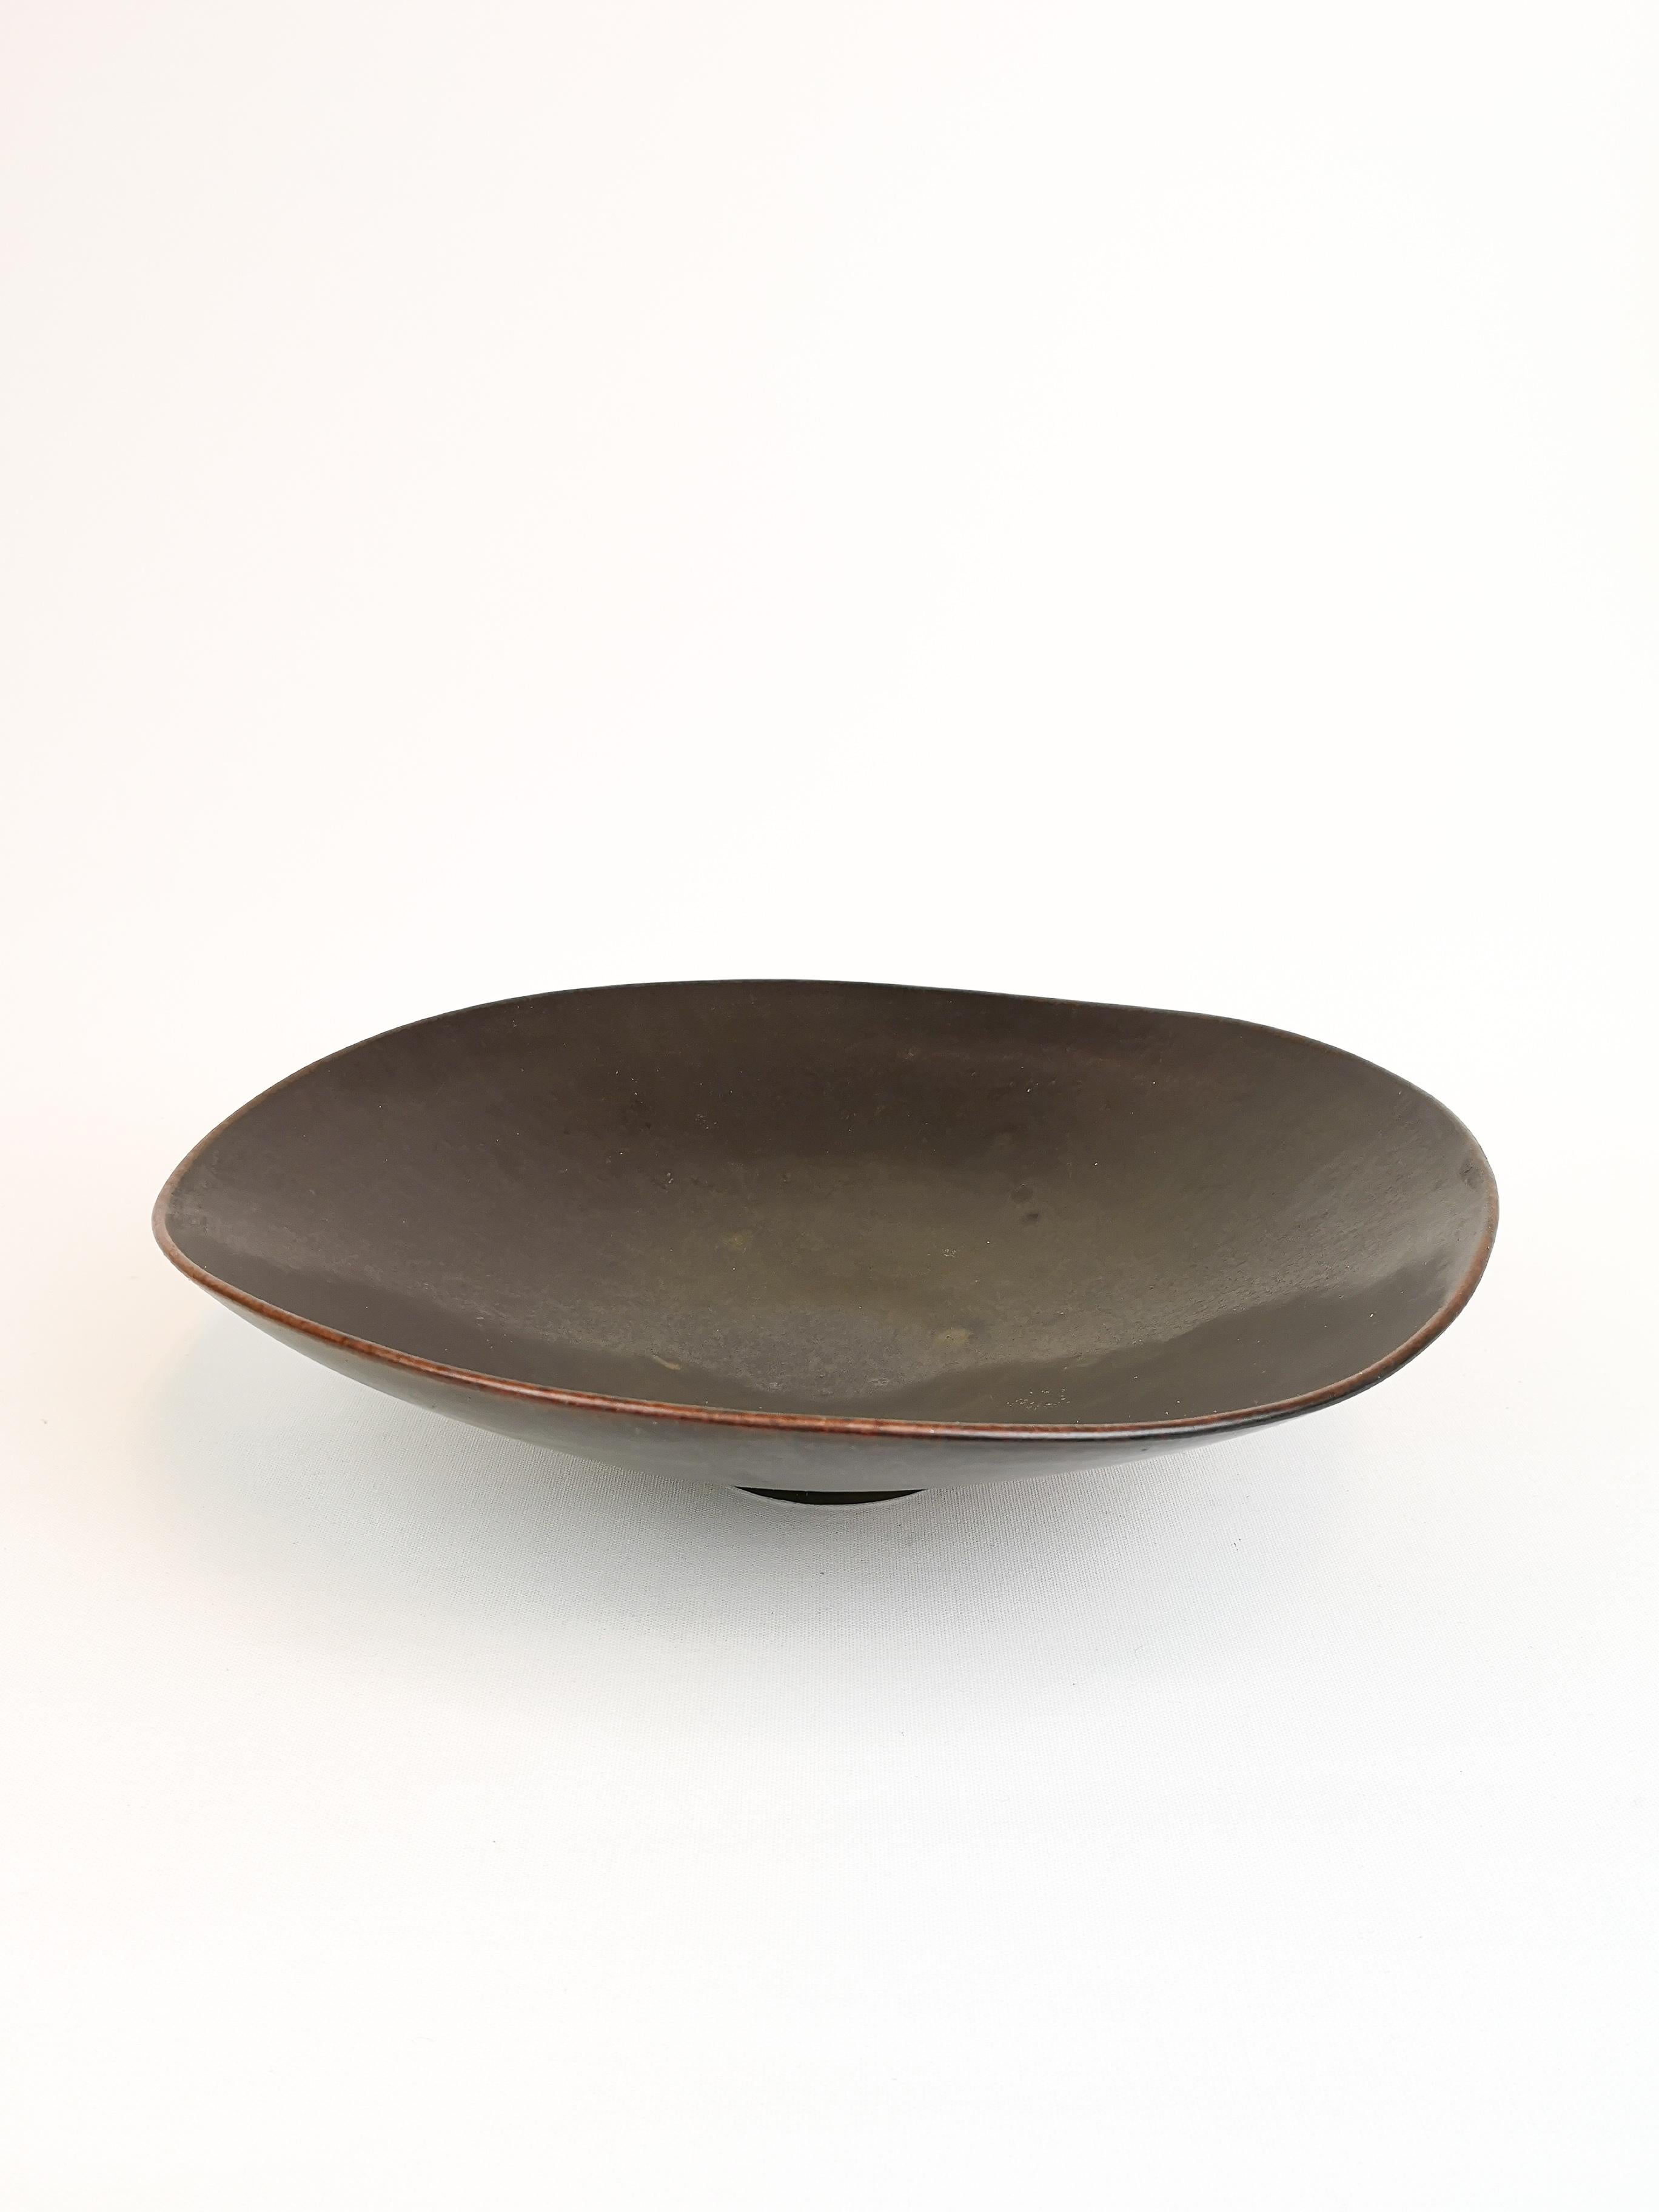 This bowl made in Sweden 1950s for Rörstrand and designed by one of the great during that period Carl-Harry Stålhane. It’s a footed bowl with brown haresfur glaze.
It’s in good condition. 

Measures D 29 cm, H 7 cm.

    